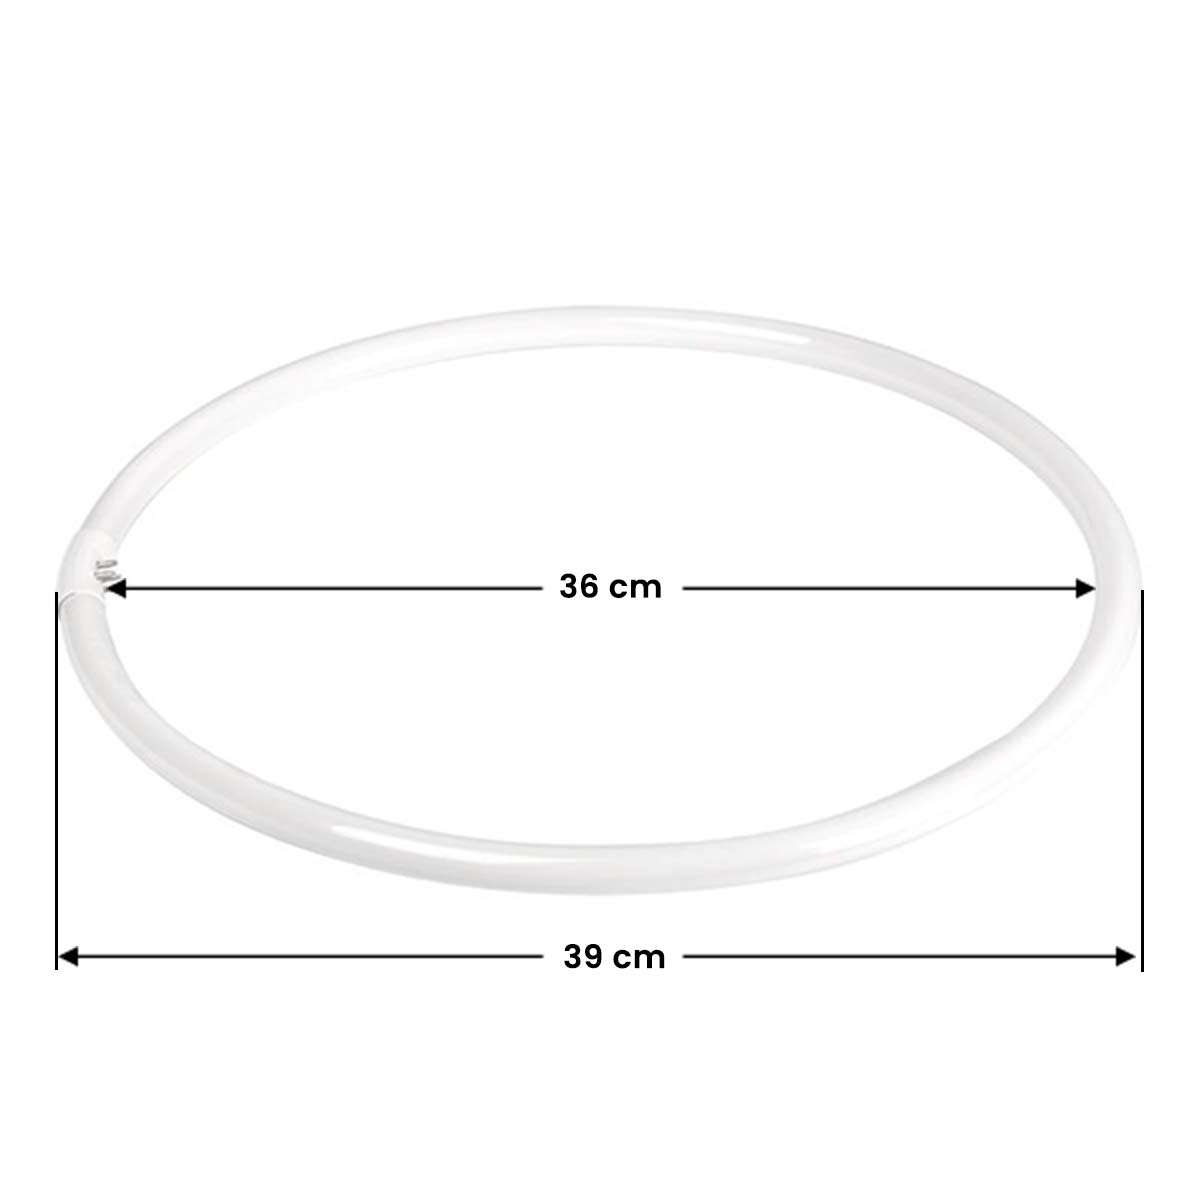 Bulb (fluorescent) for ring lamp 18 '' 55w